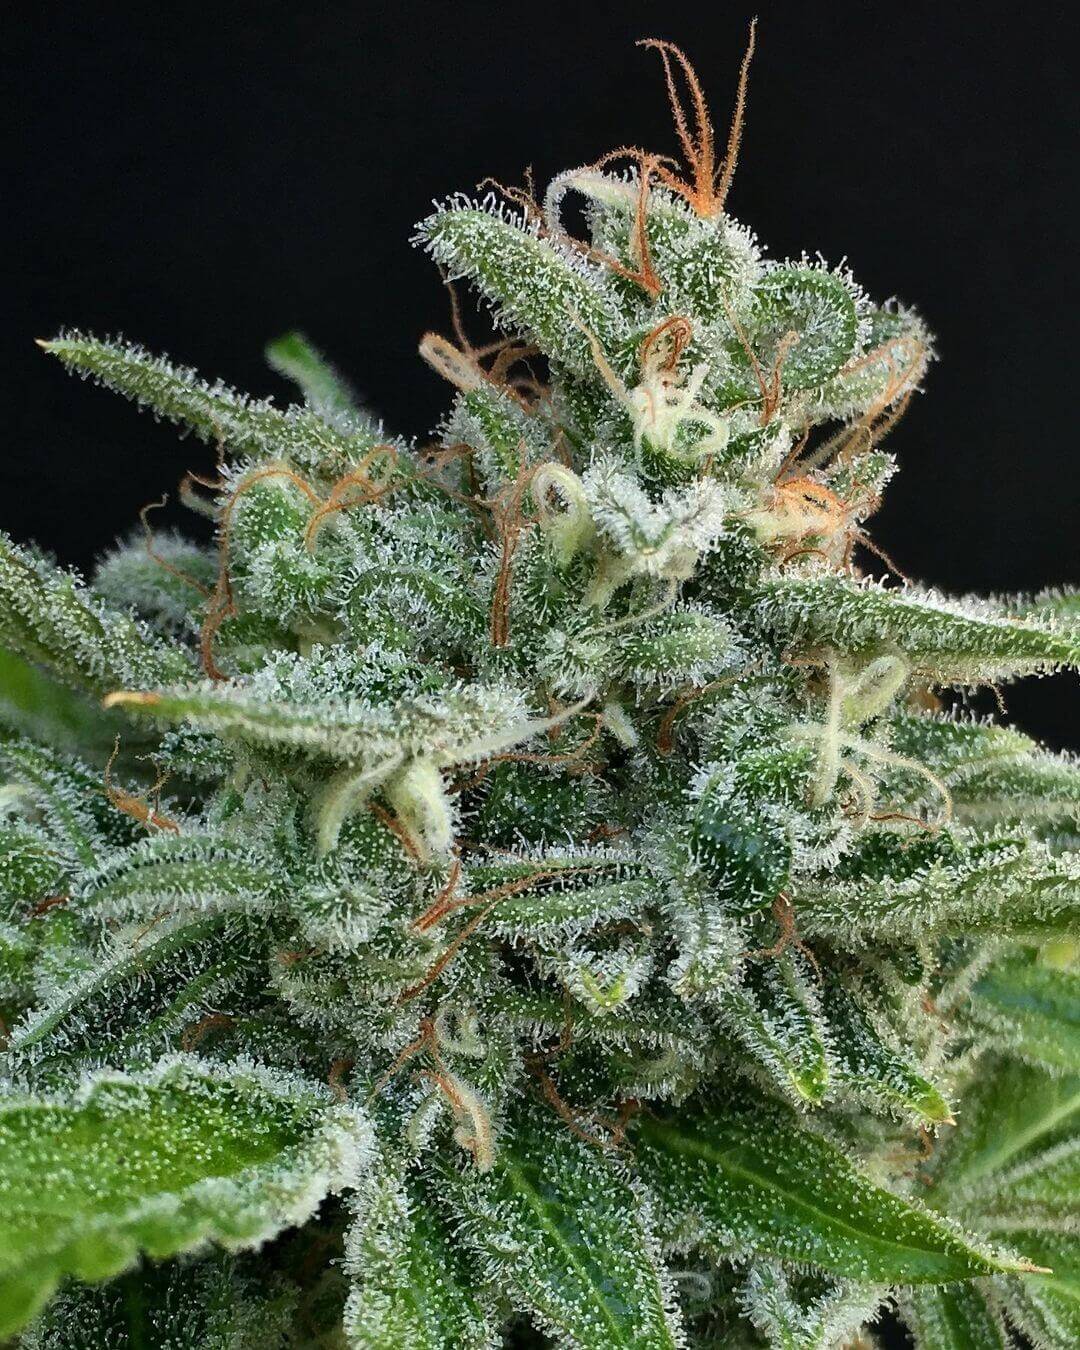 Scout master seeds